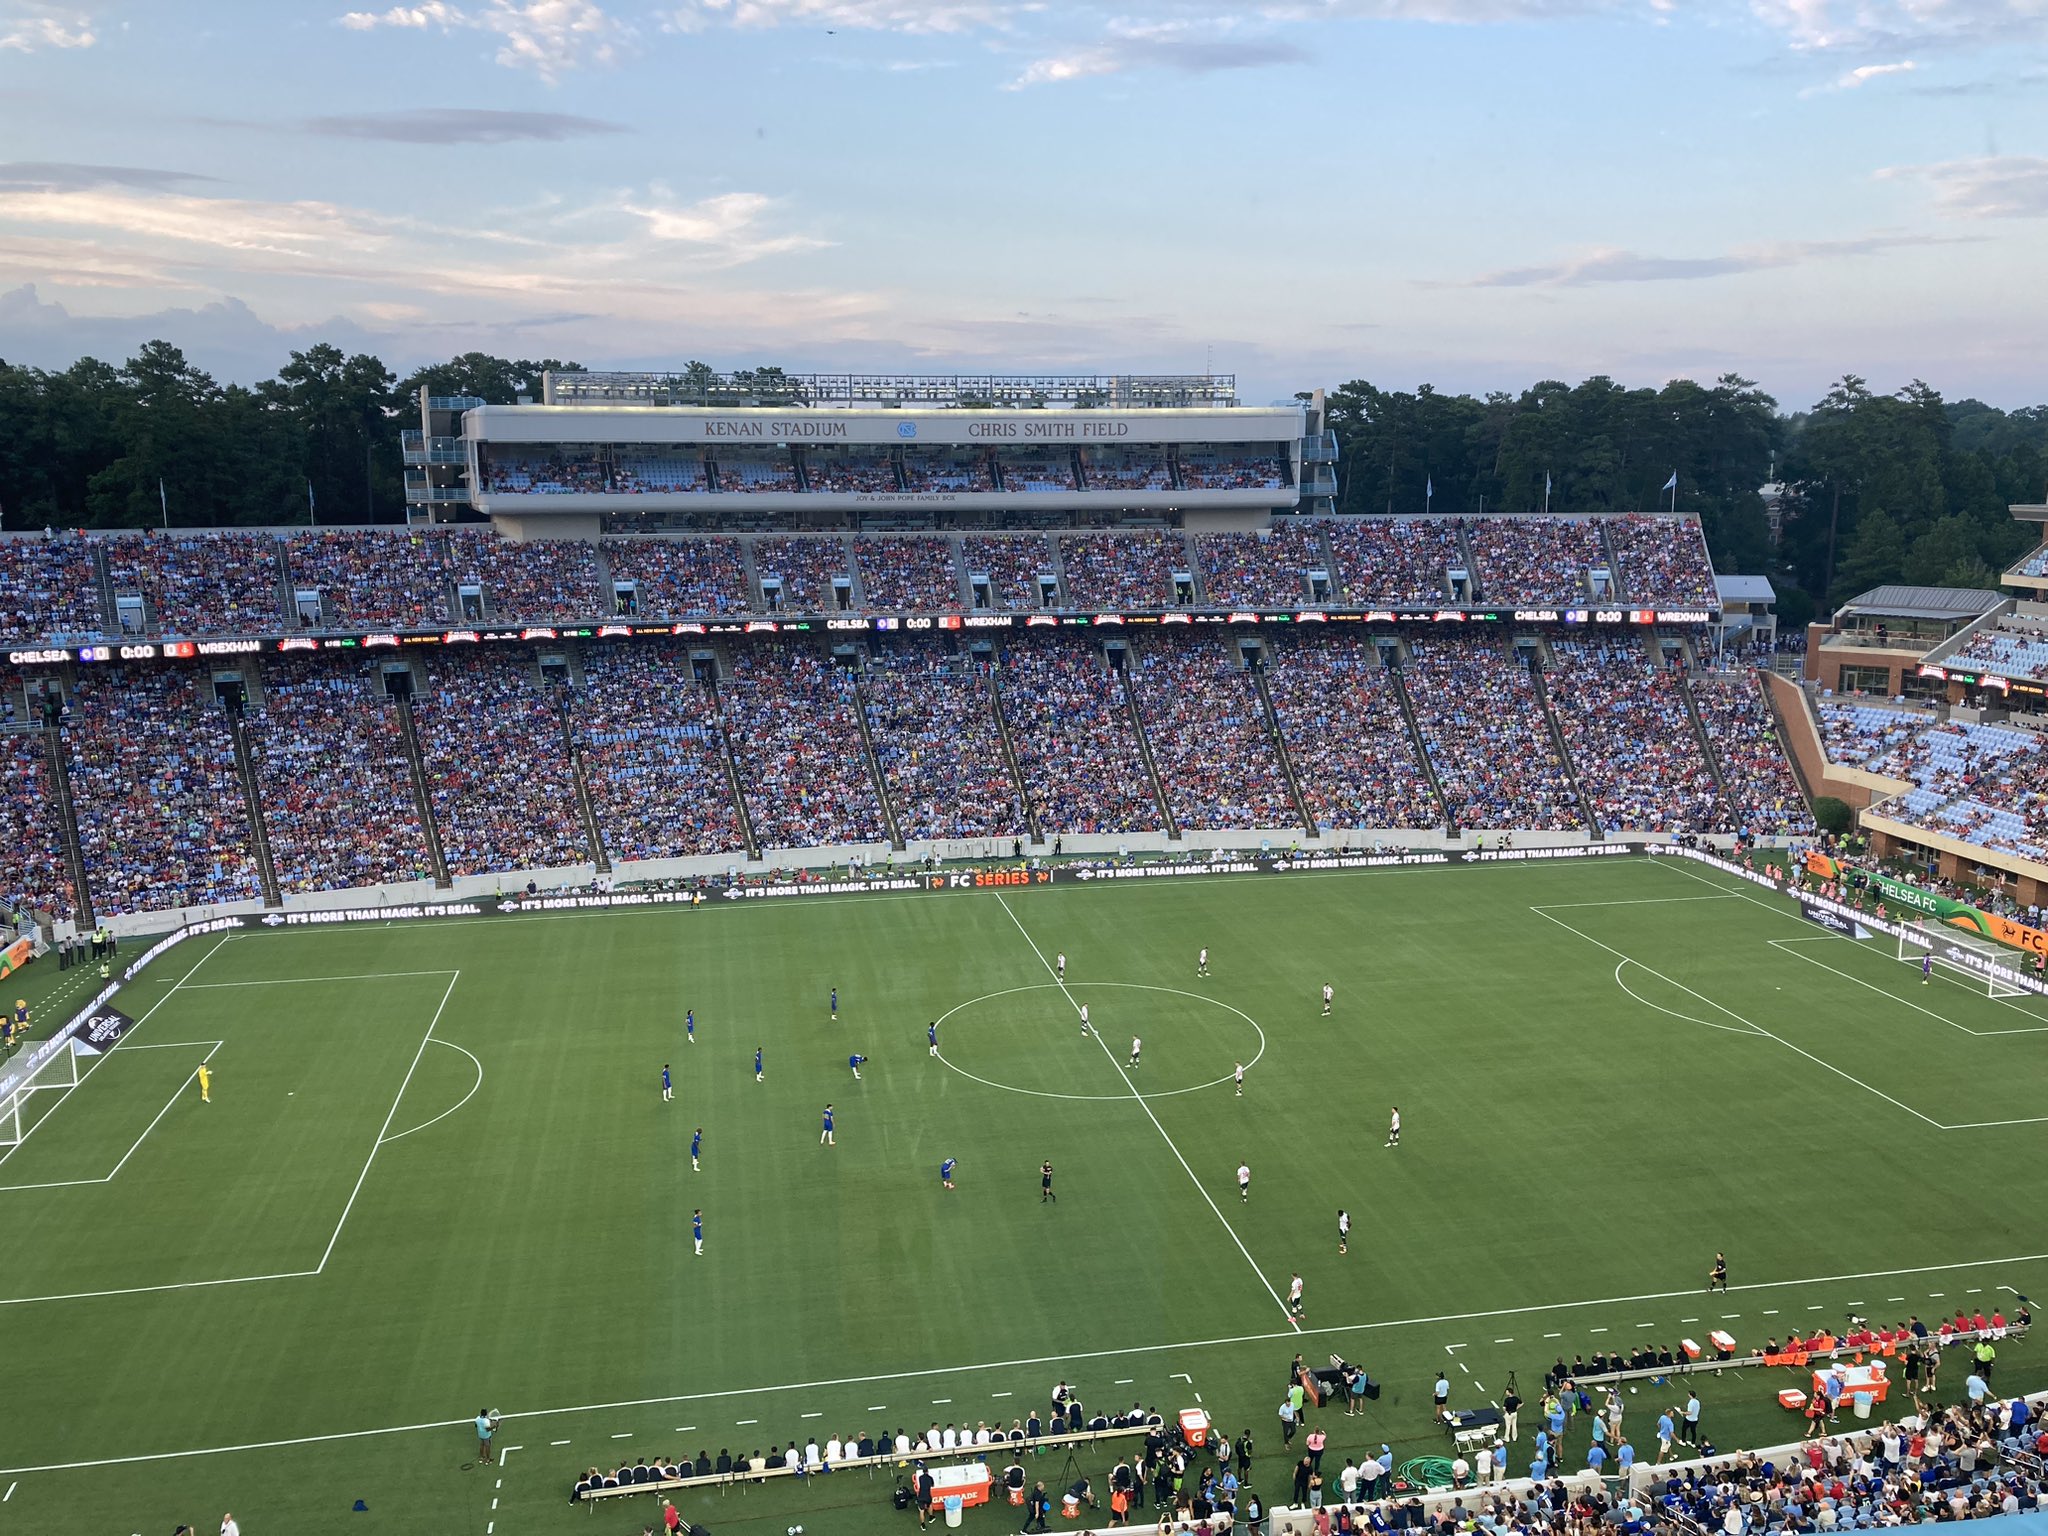 Manchester City, Celtic FC To Play Exhibition Match at Kenan Stadium in July